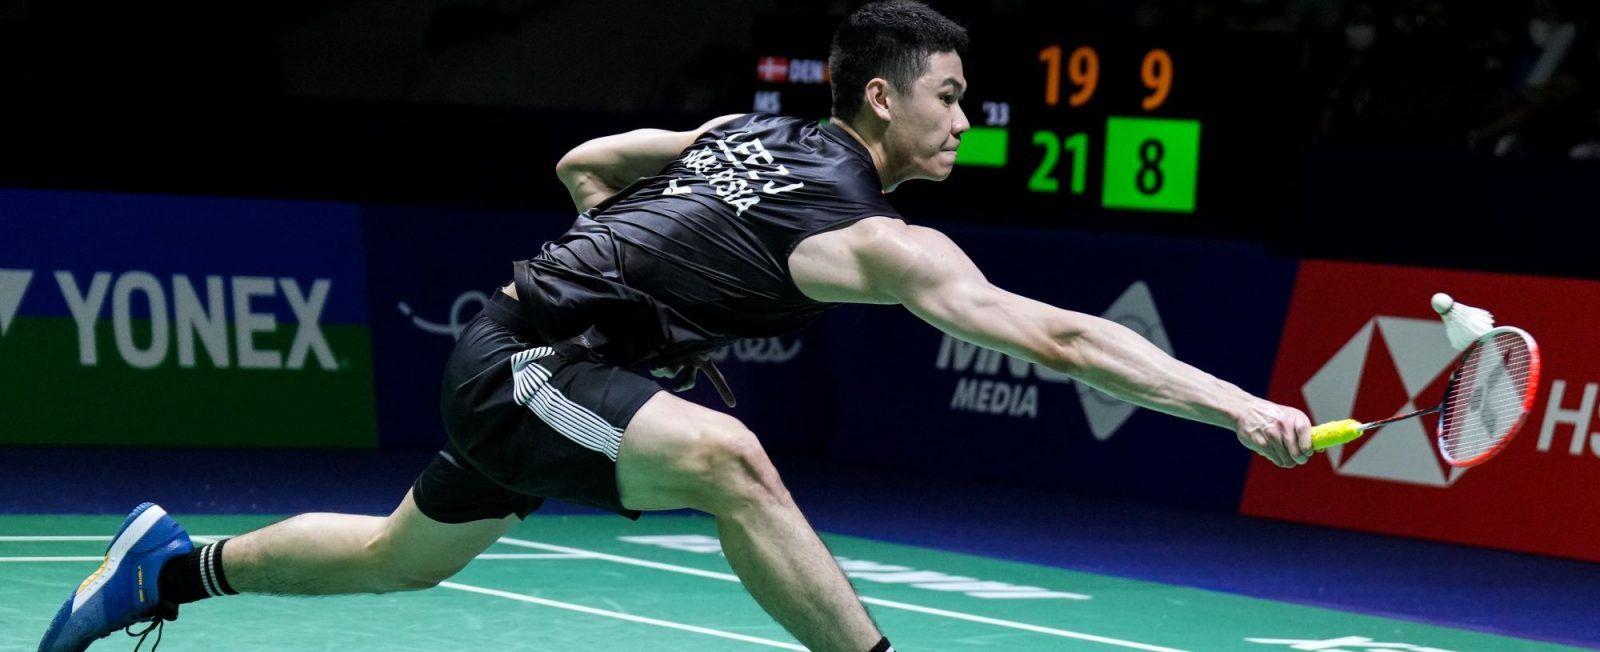 The latest updates on Malaysia’s progress at the 2022 Malaysia Open